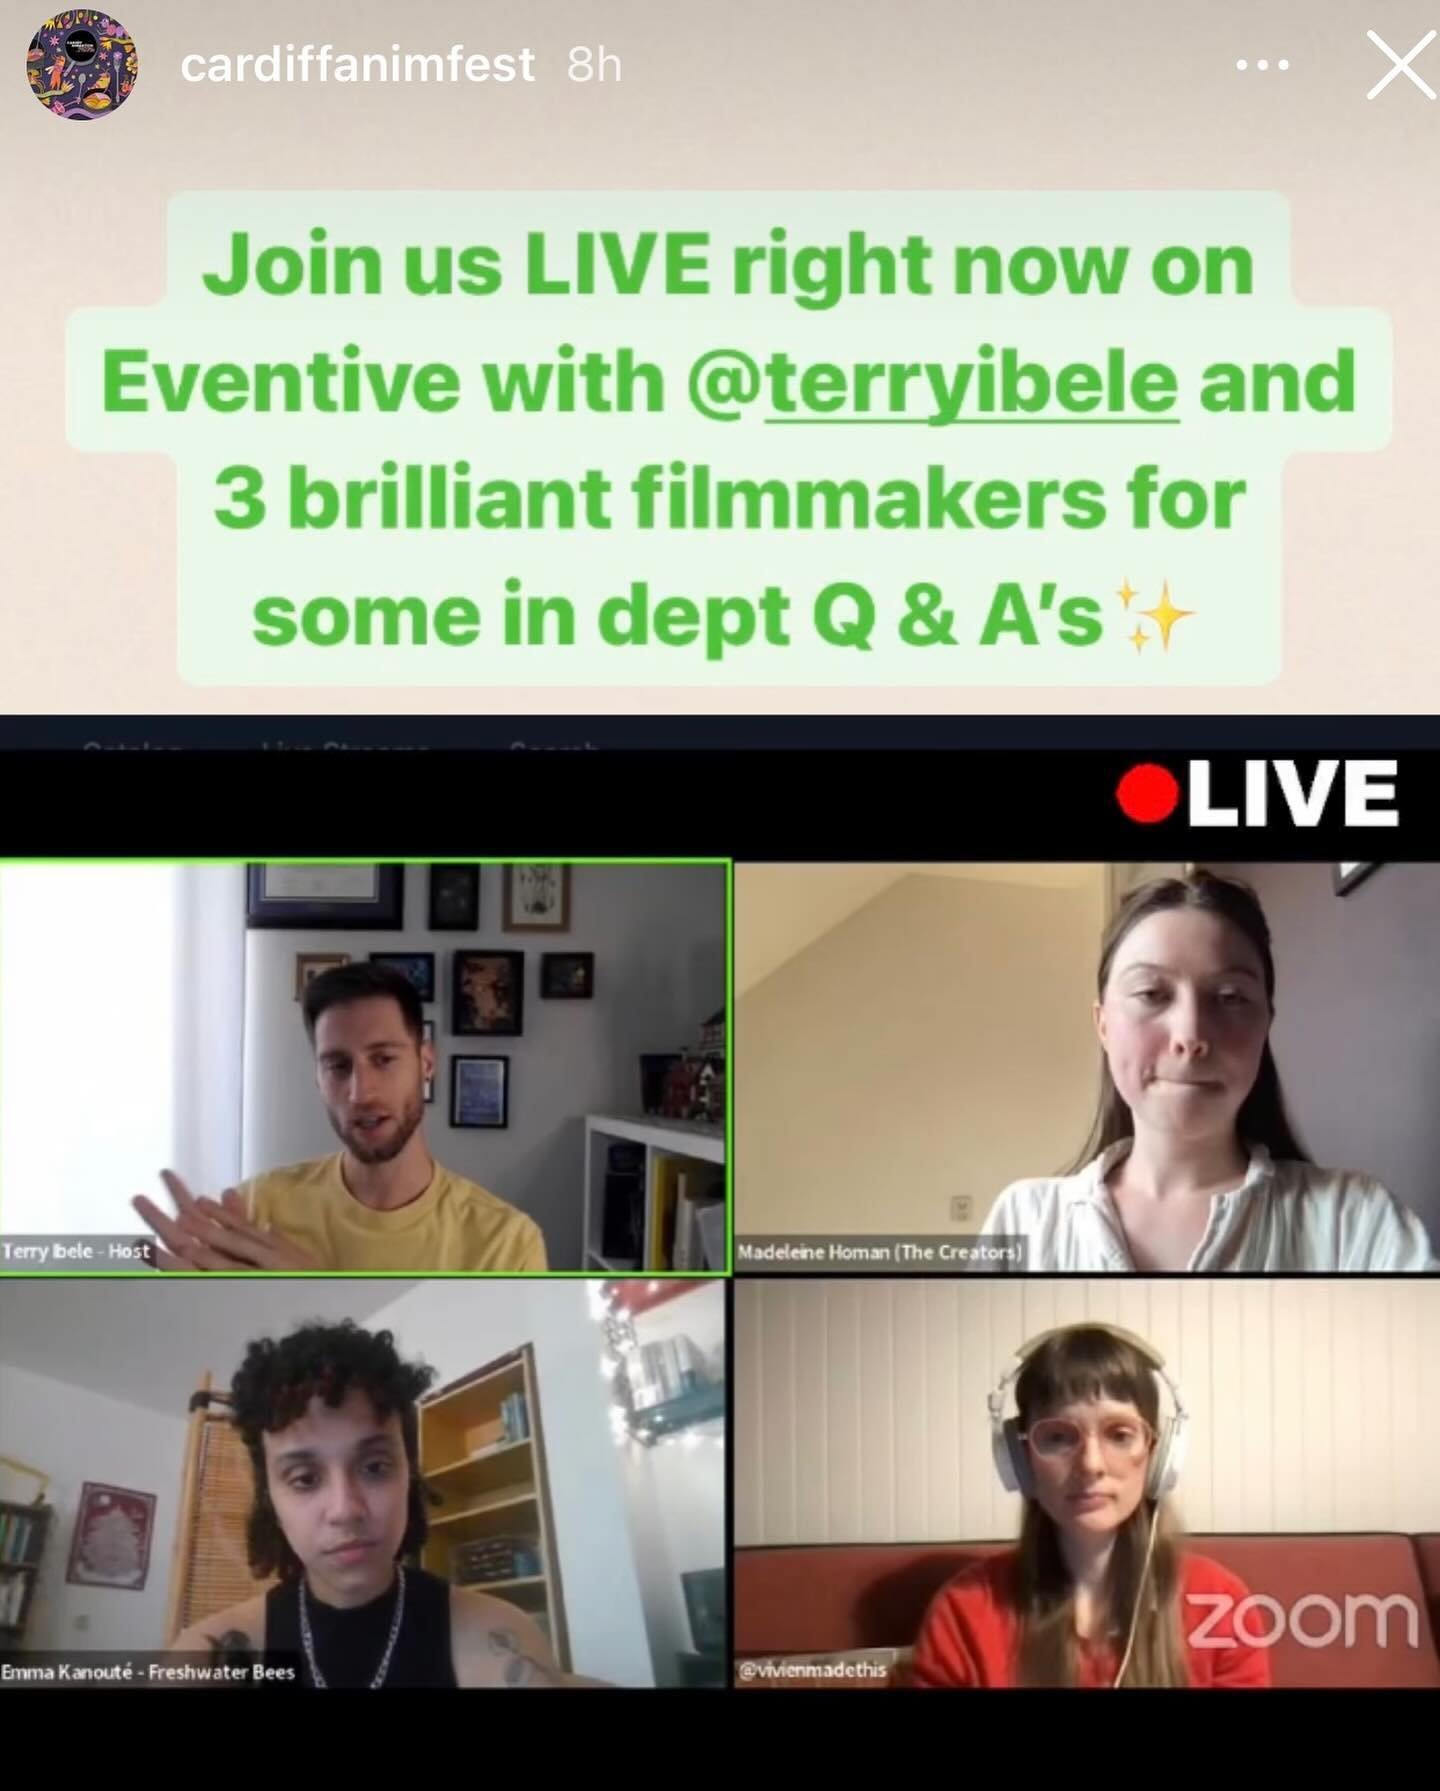 It was lovely to meet super talented animators @emma.kanoute and @madeleinehoman at the online Q&amp;A for @cardiffanimfest last week! Host @terryibele did a great job of hosting. The festival and Terry&rsquo;s cool stop motion work in Canada introdu